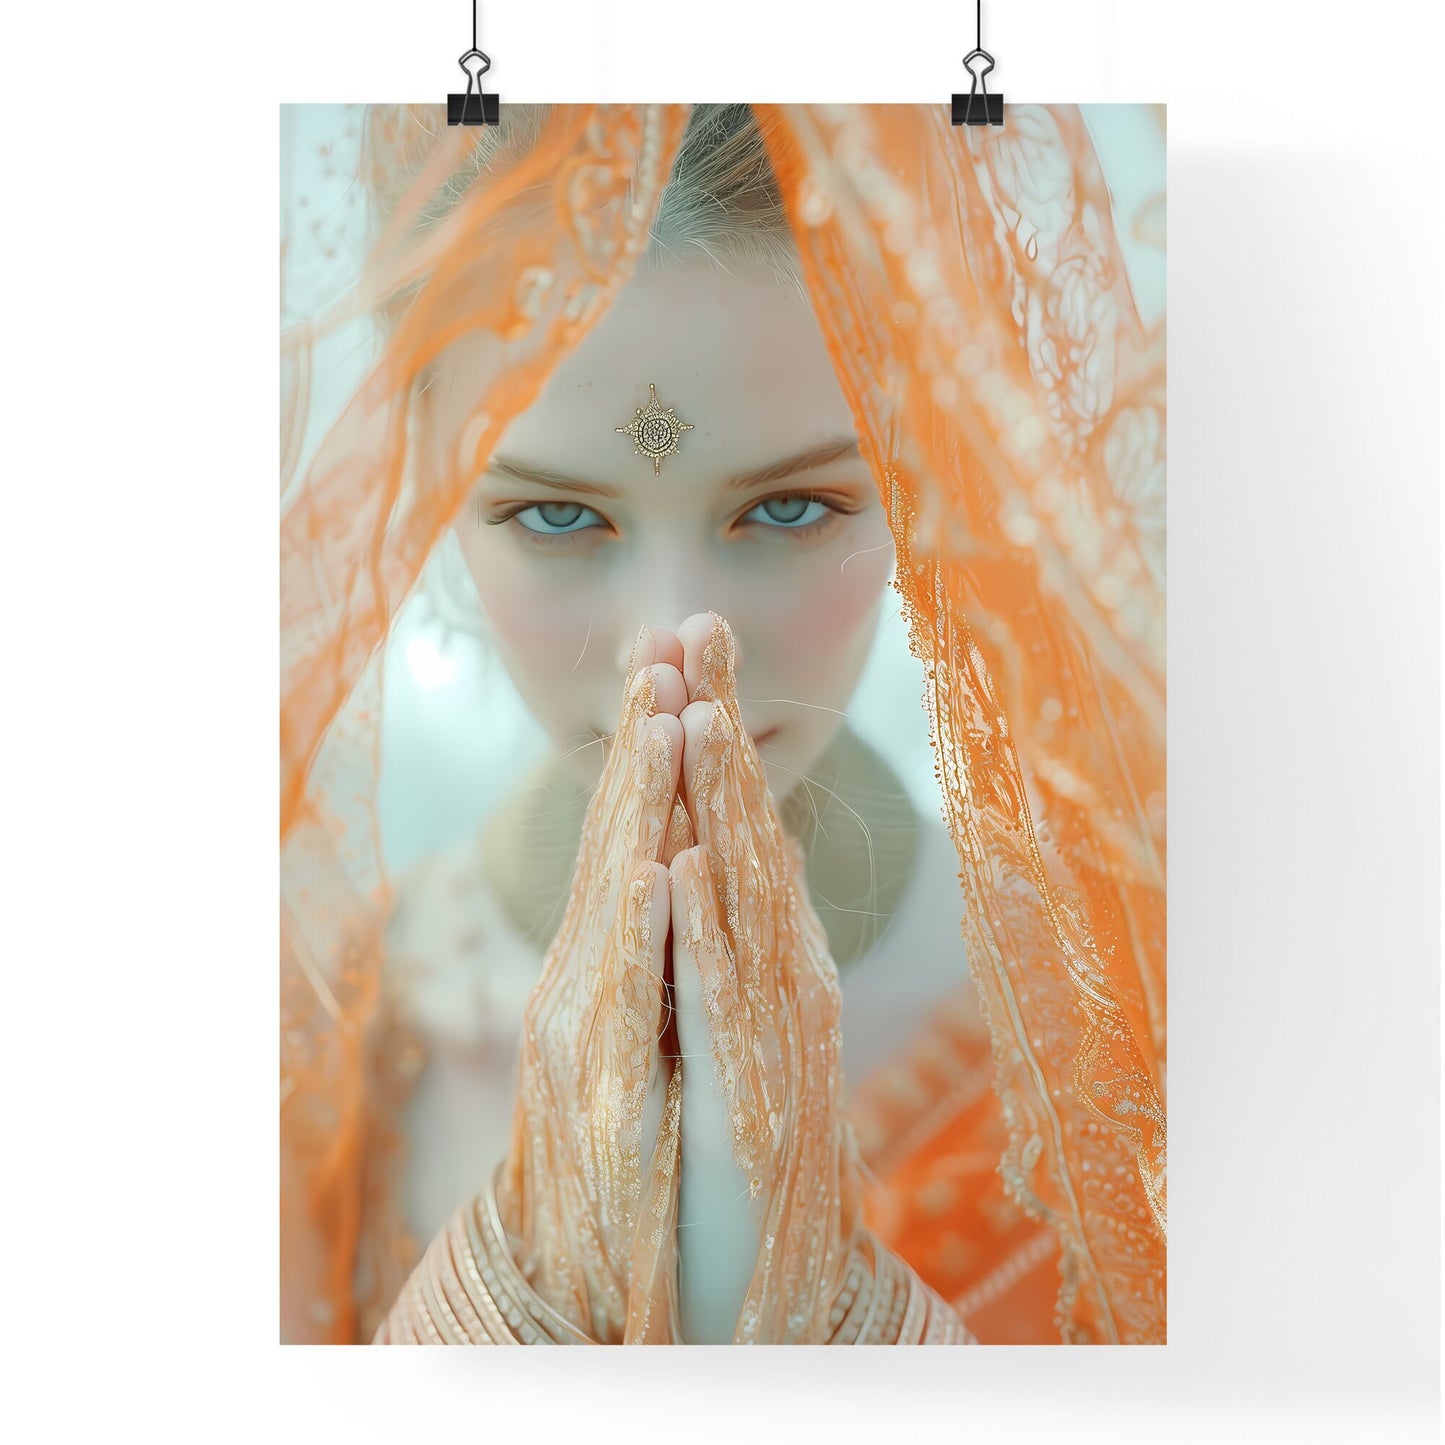 Mary Mother of God Poster, halo above her head, hands in praying sign - Art print of a woman with a veil covering her face with hands Default Title